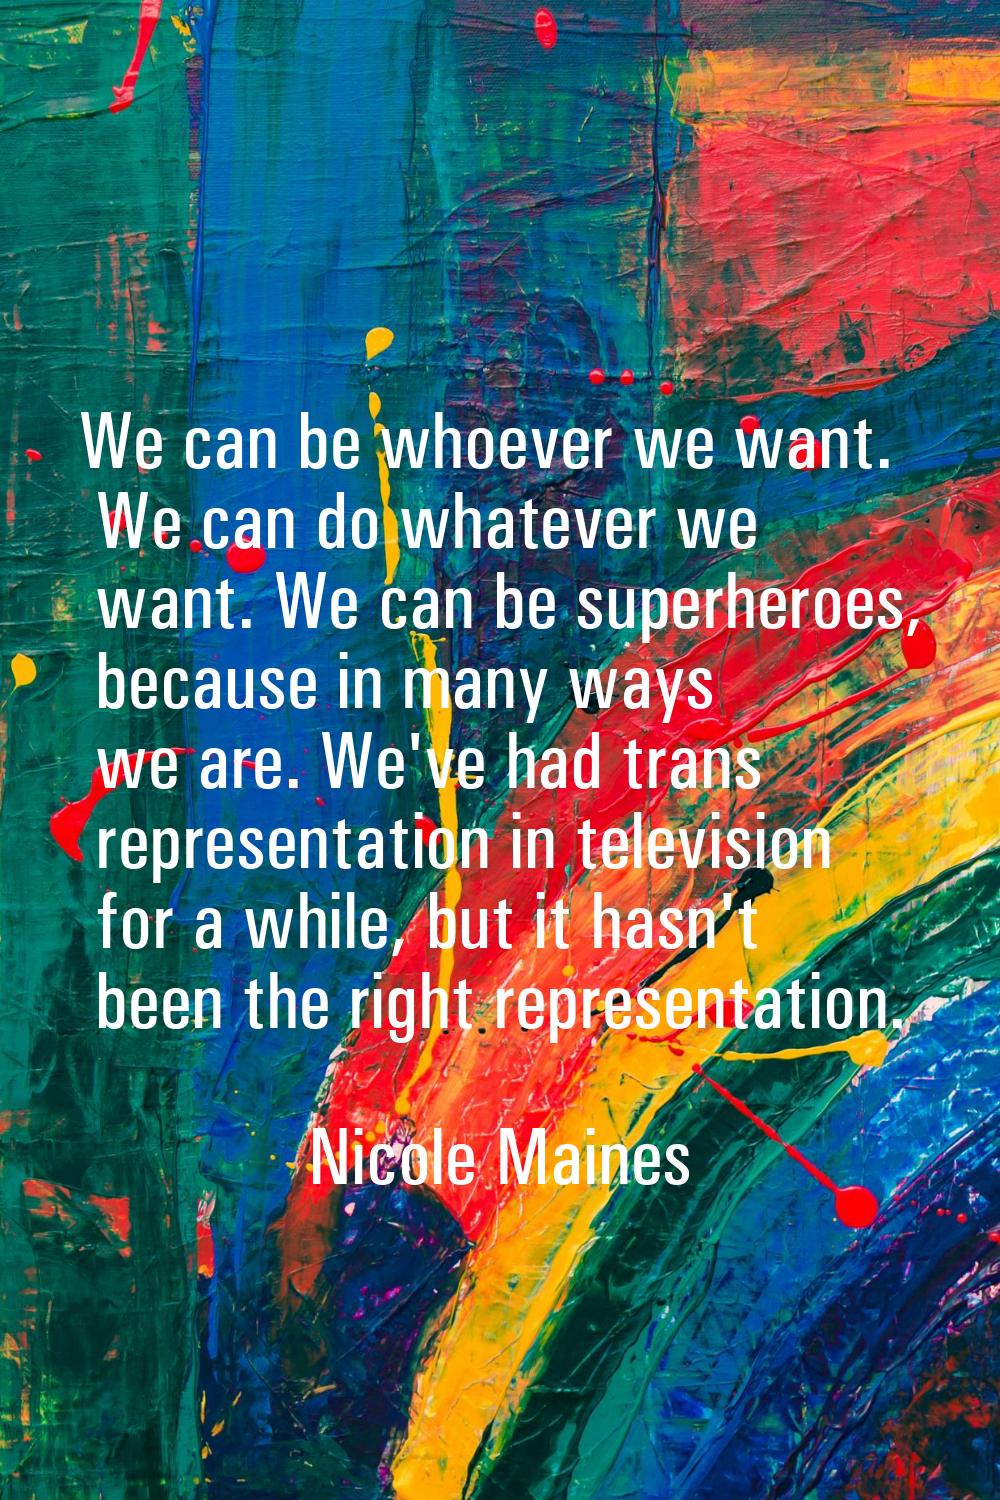 We can be whoever we want. We can do whatever we want. We can be superheroes, because in many ways 